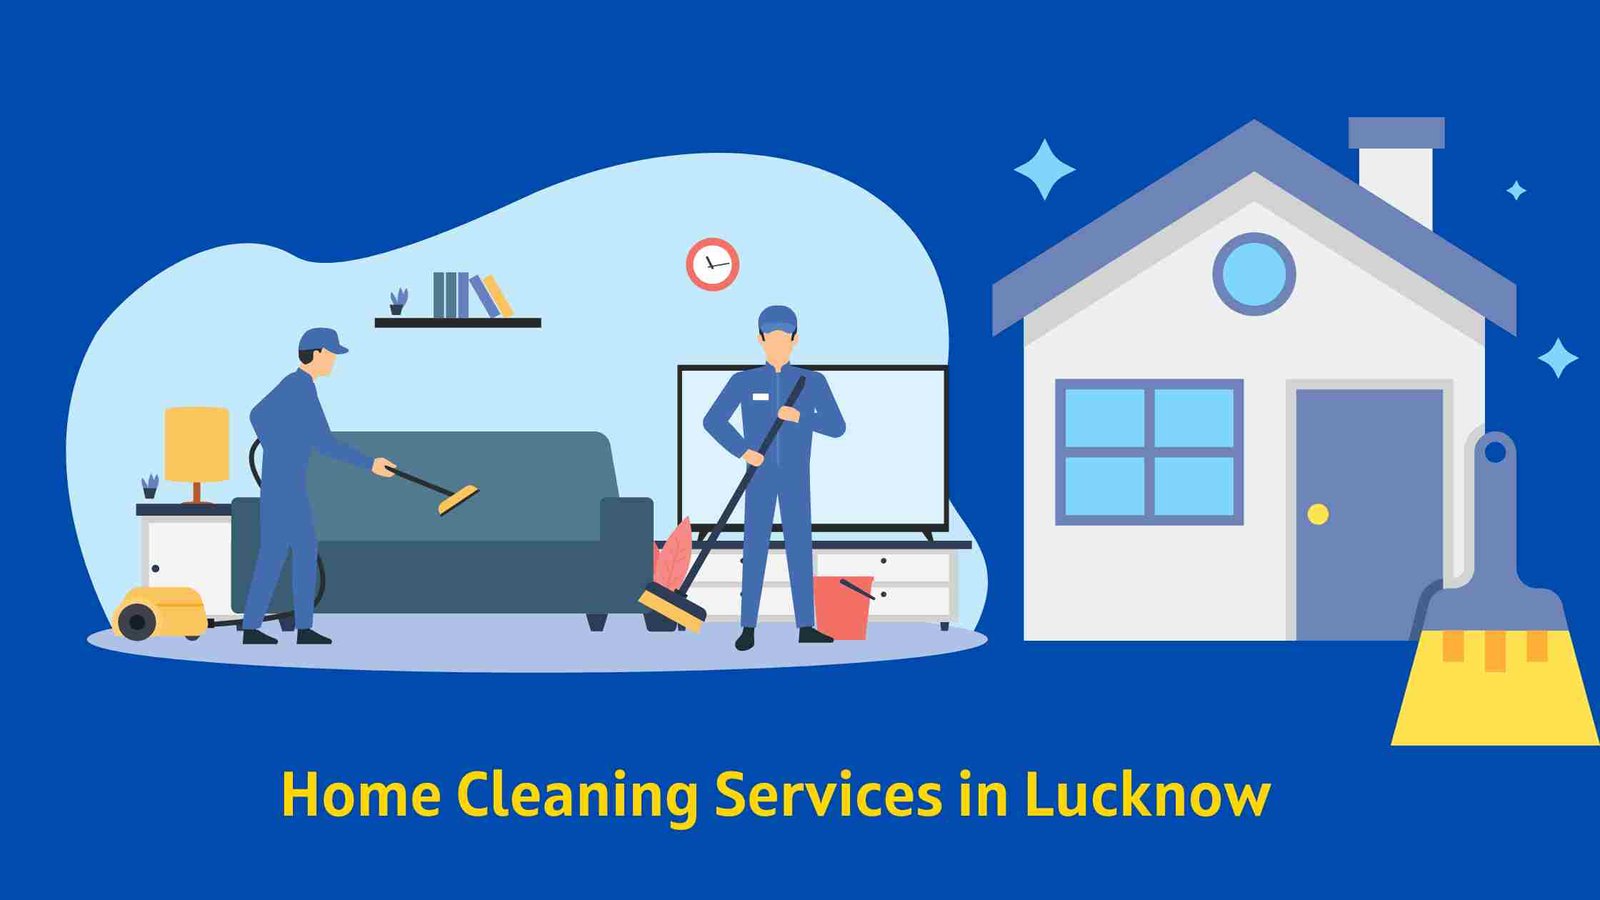 Home Cleaning Services in Lucknow